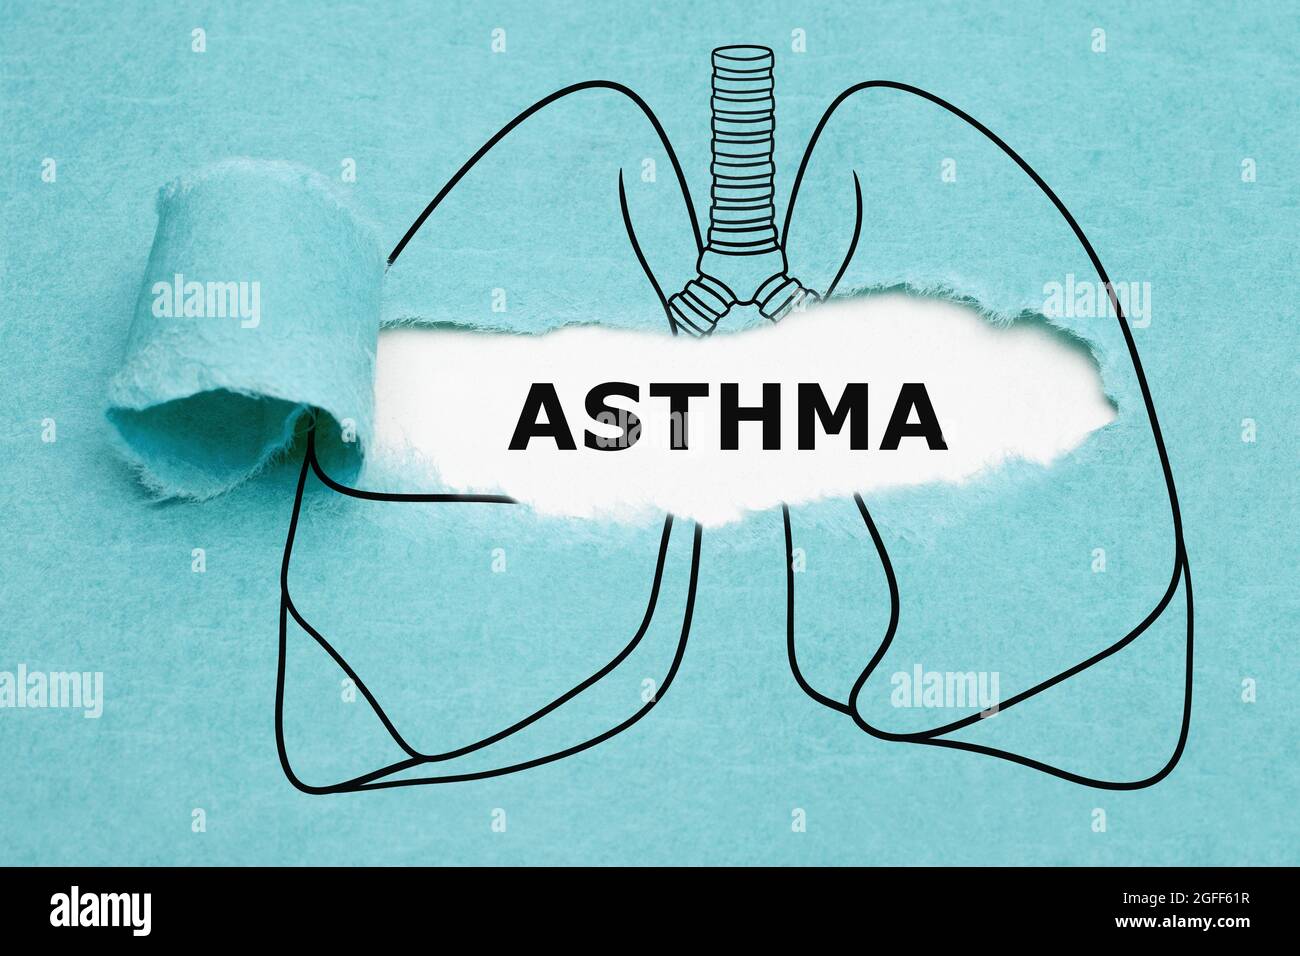 Medical concept with the word Asthma appearing behind torn blue paper in drawn human lungs. Stock Photo